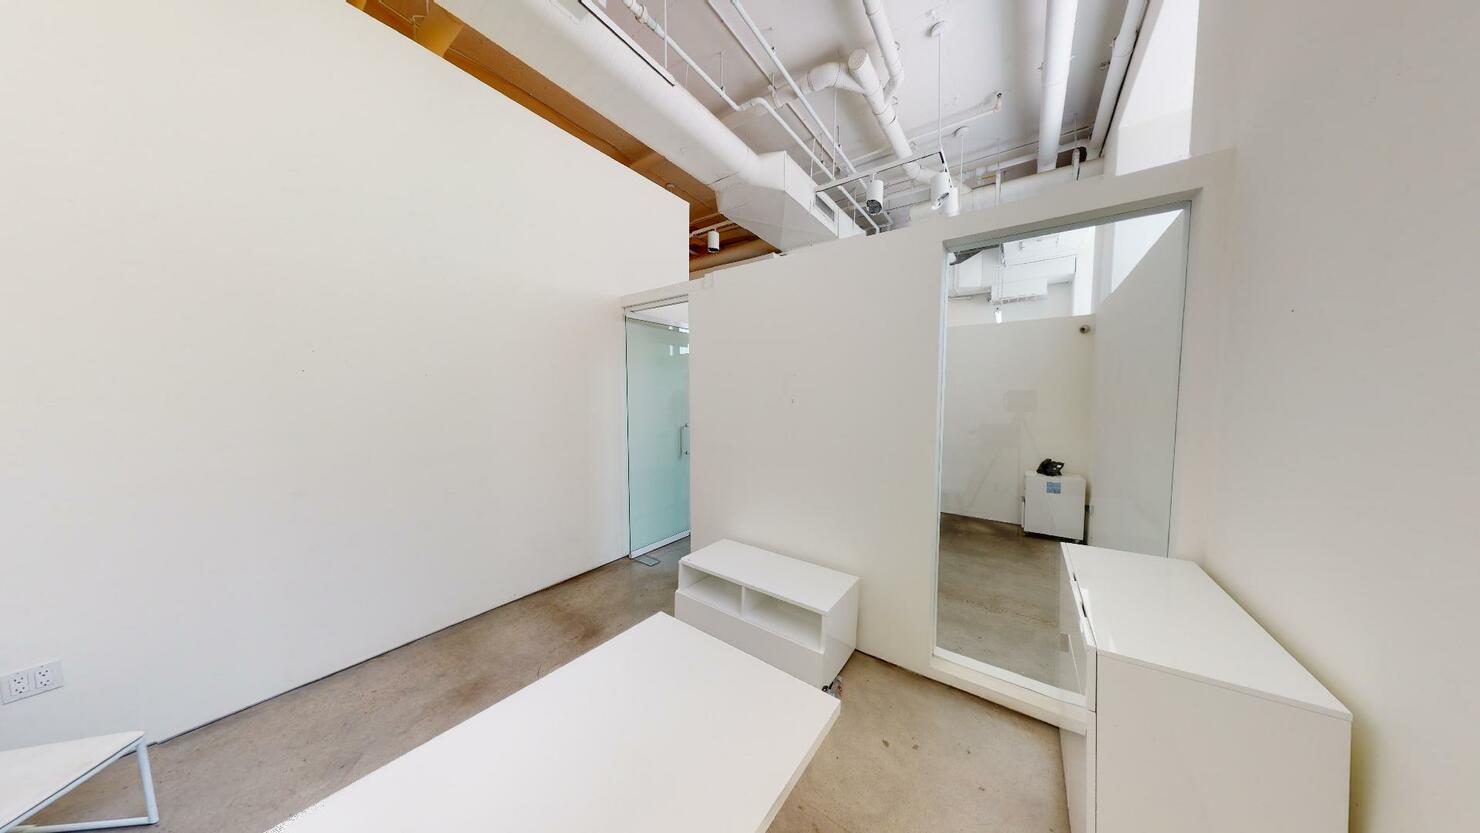 540 West 28th Street Office Space - Office Room with Glass Walls